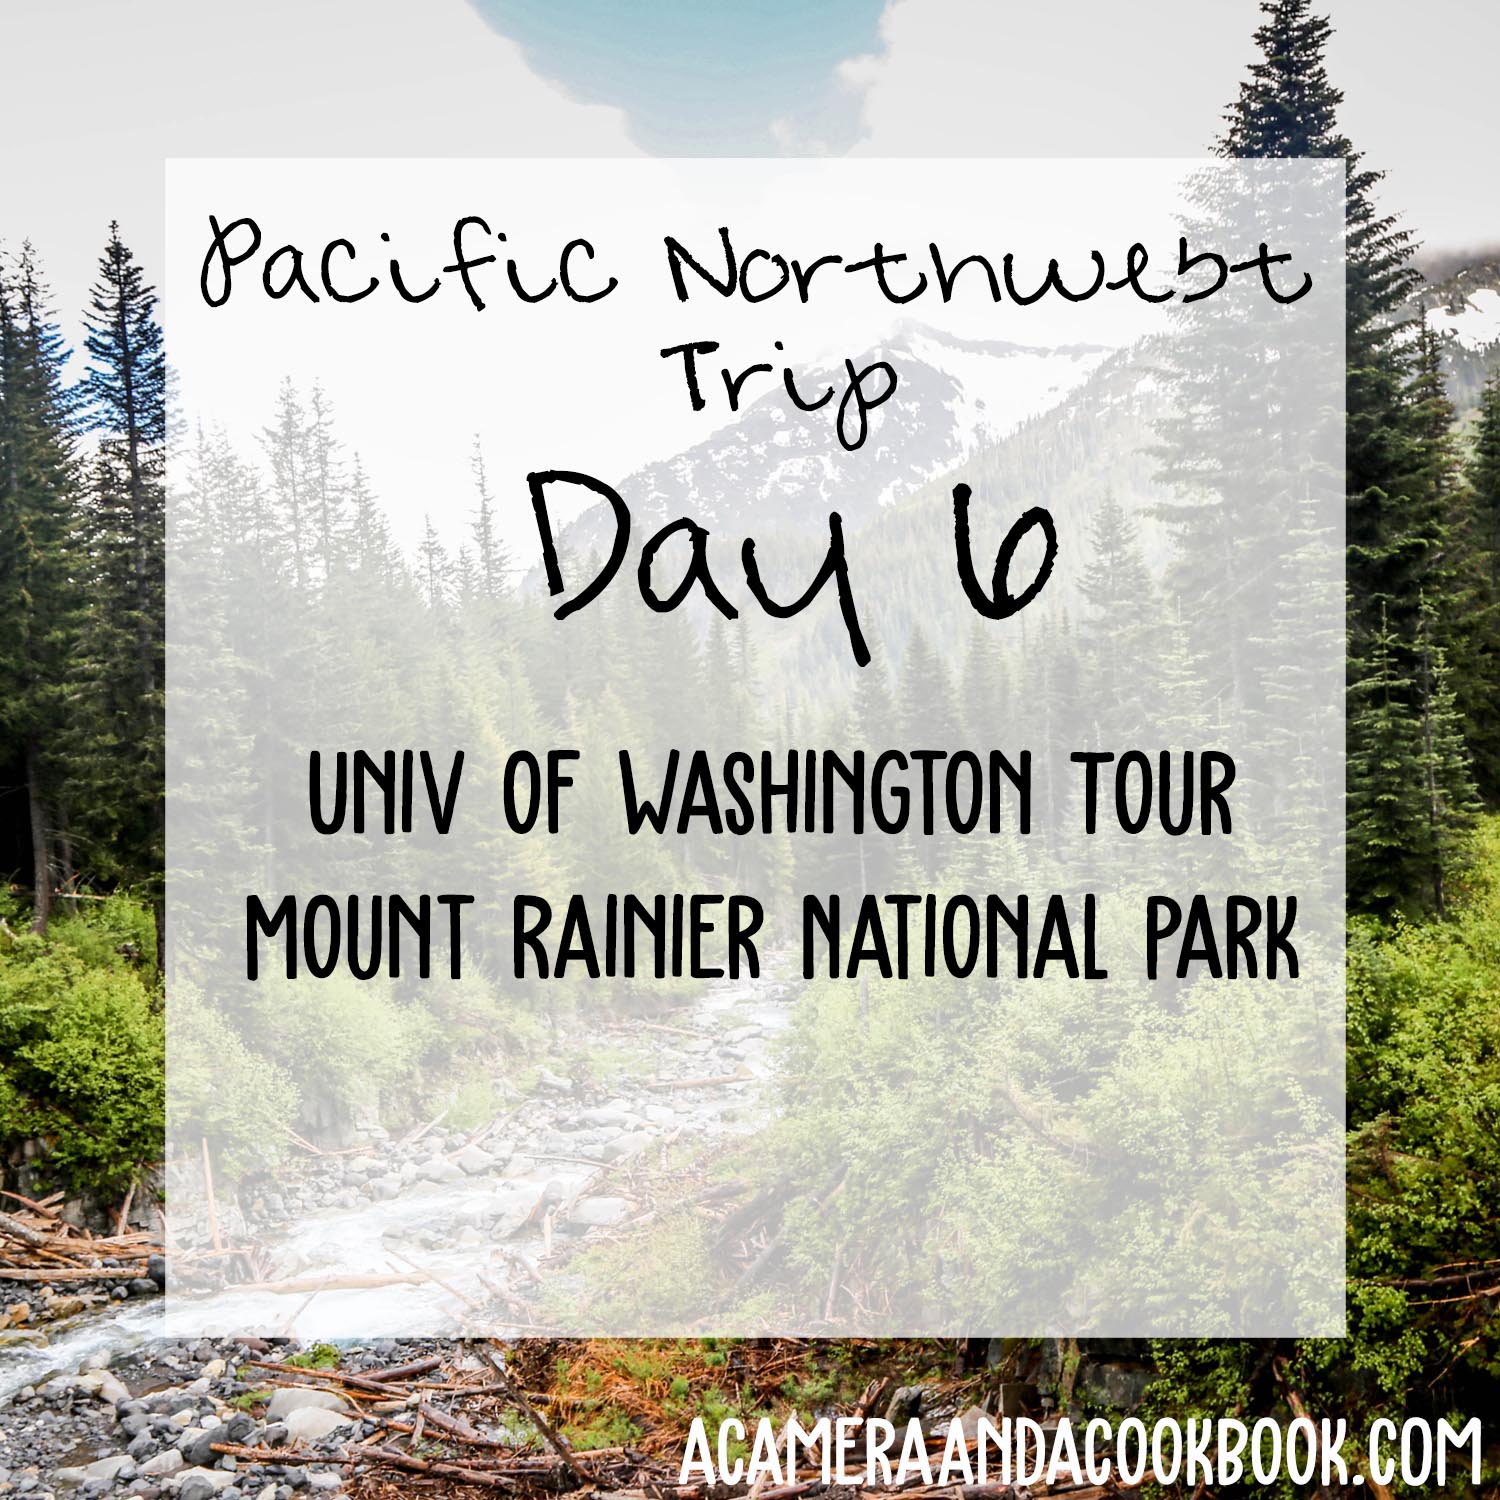 Pacific NW Trip: Day 6